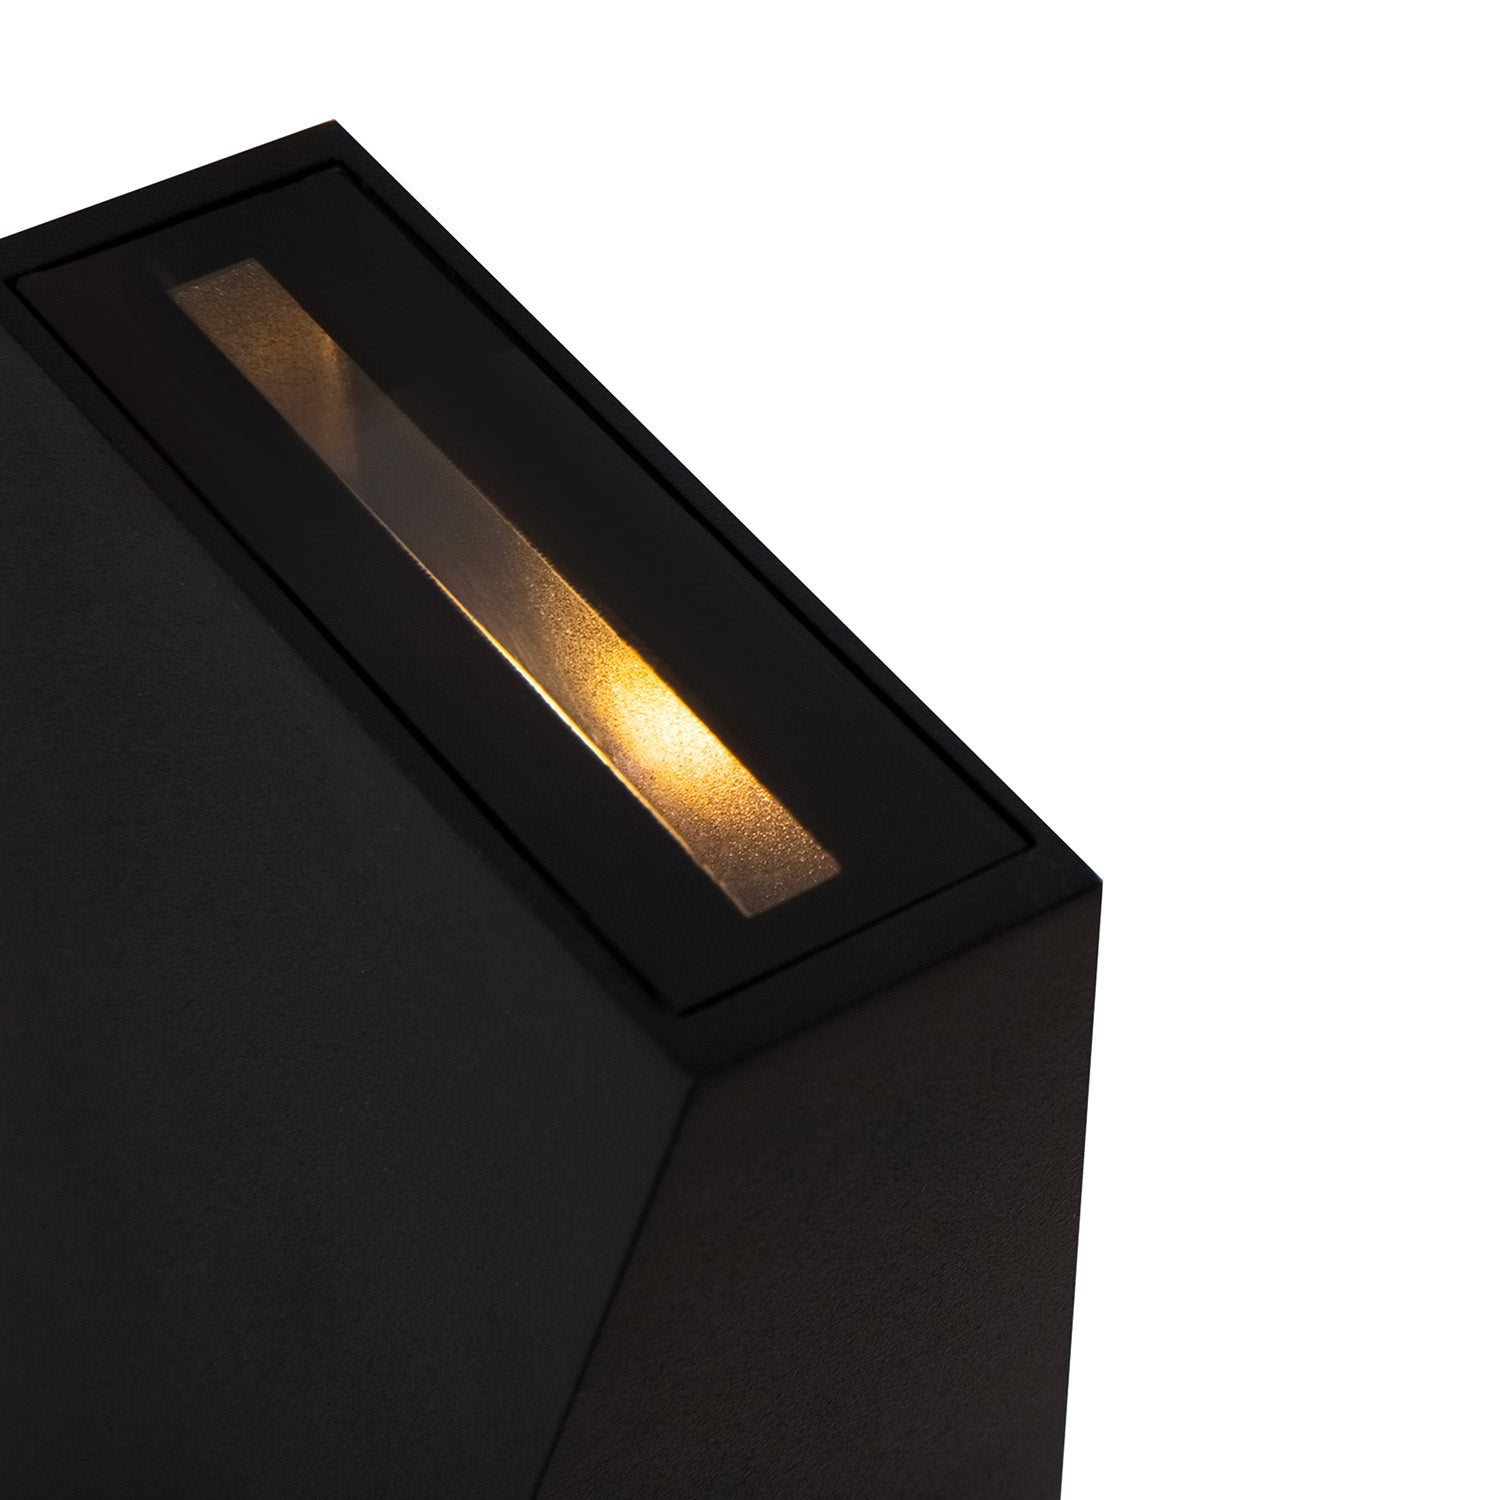 TIMES SQUARE - Geometric design exterior wall light, waterproof and resistant